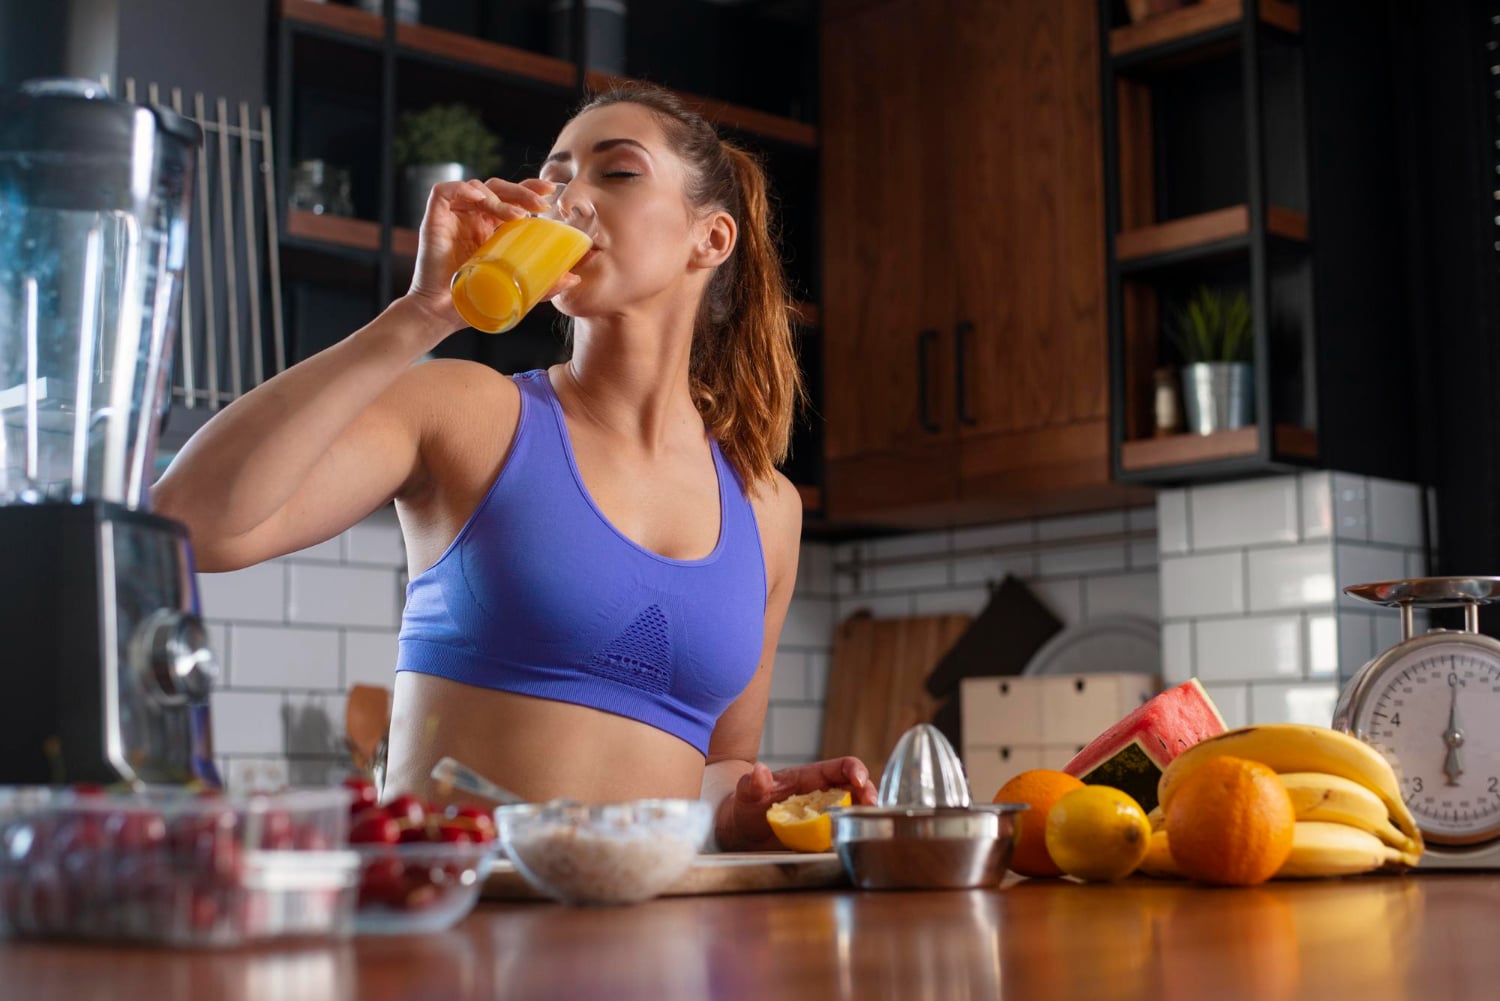 Liquid Diet: What do I need to know?